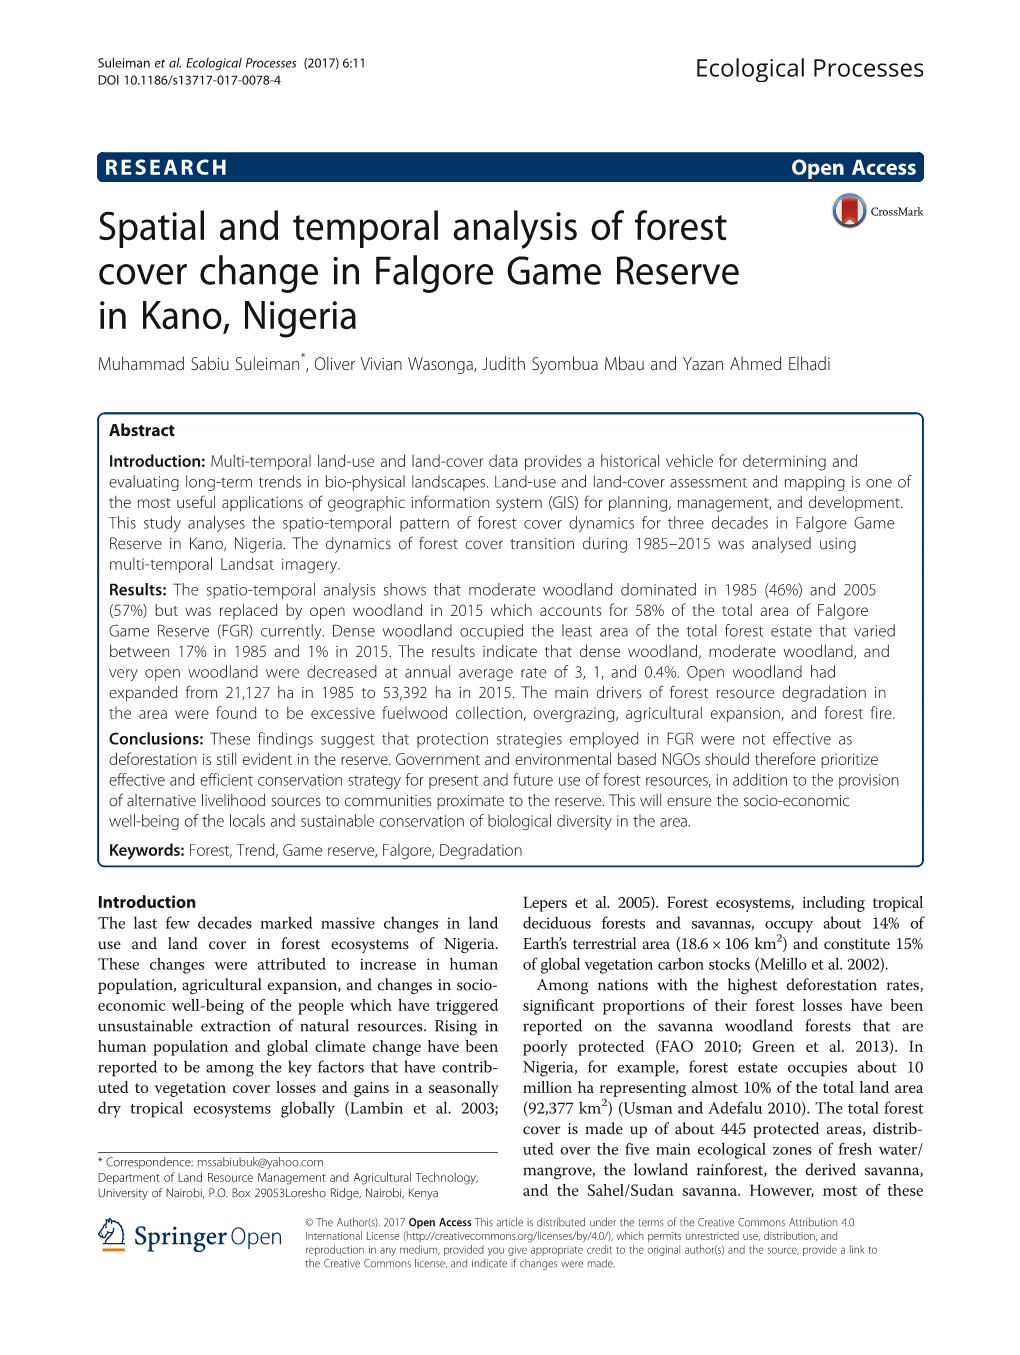 Spatial and Temporal Analysis of Forest Cover Change in Falgore Game